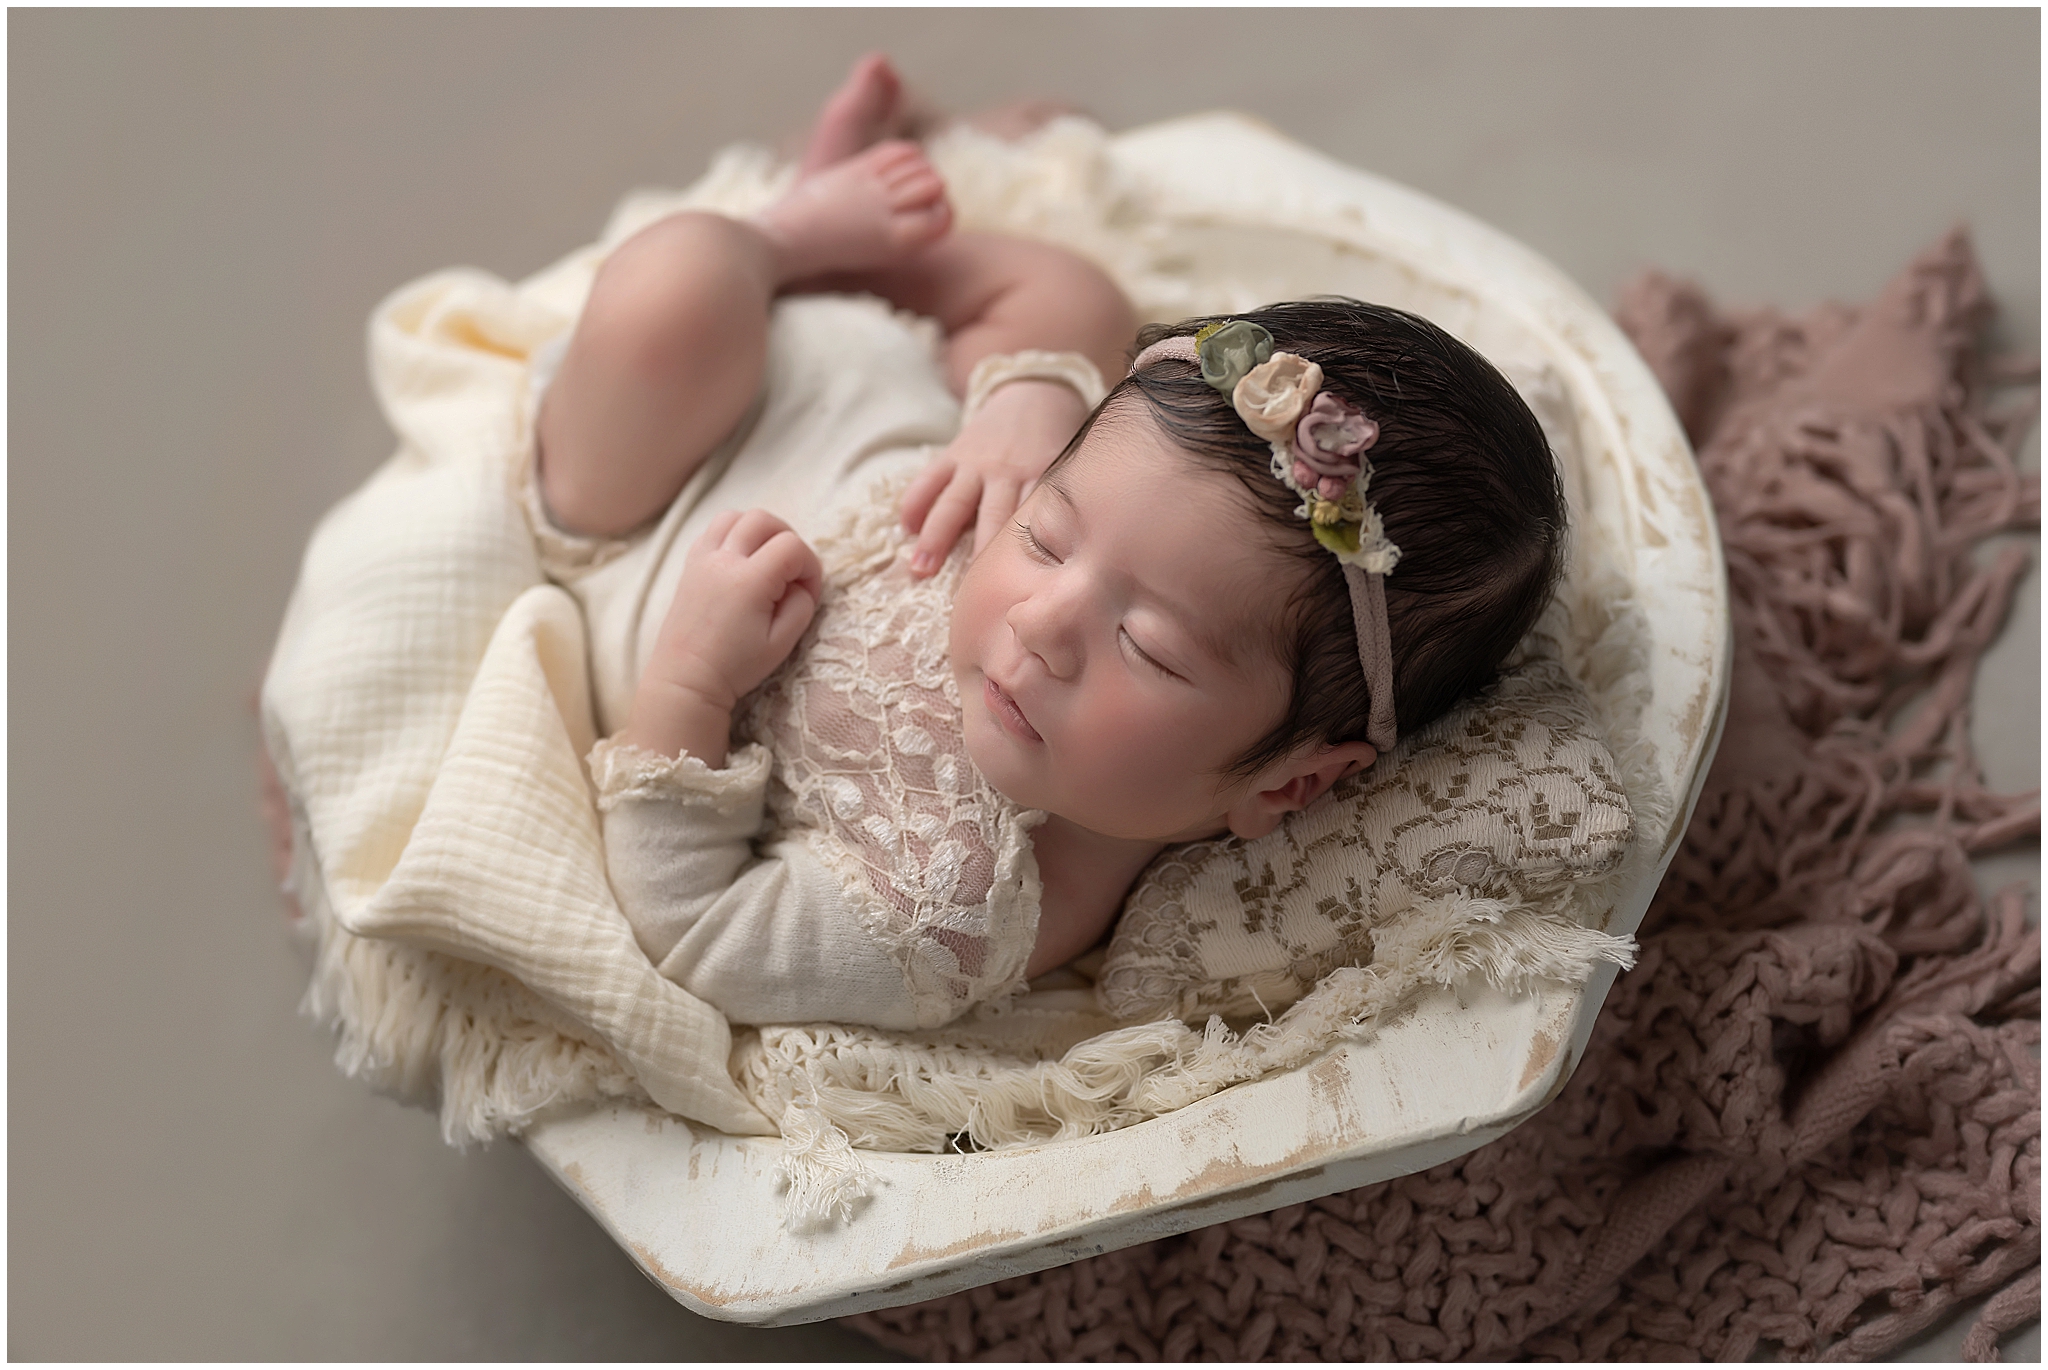 baby girl sleeping in bowl during newborn photo session at studio in london ontario